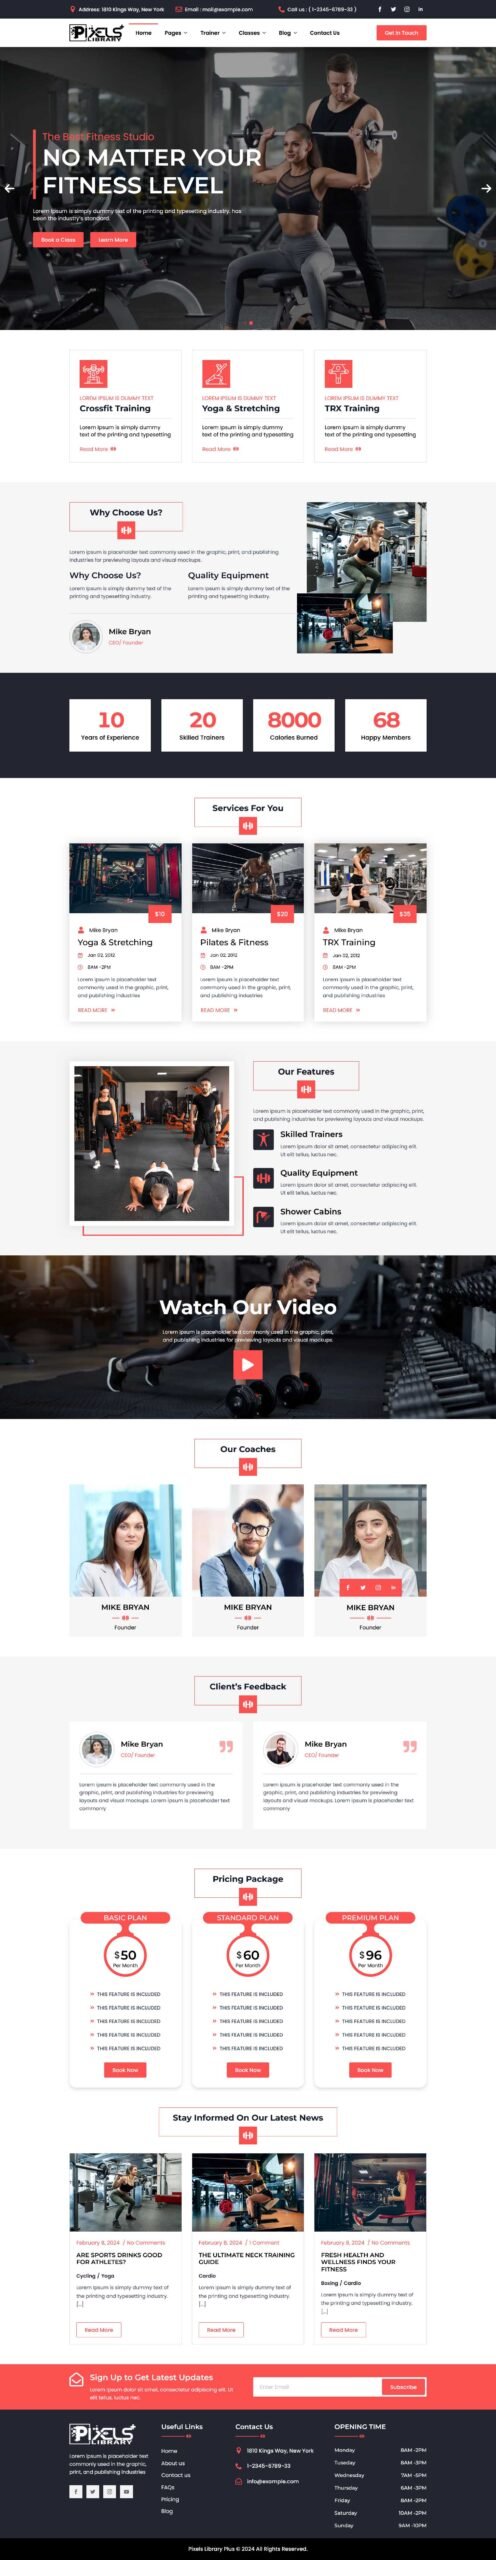 Breakdance Fitness and Gym Layouts Pack SC